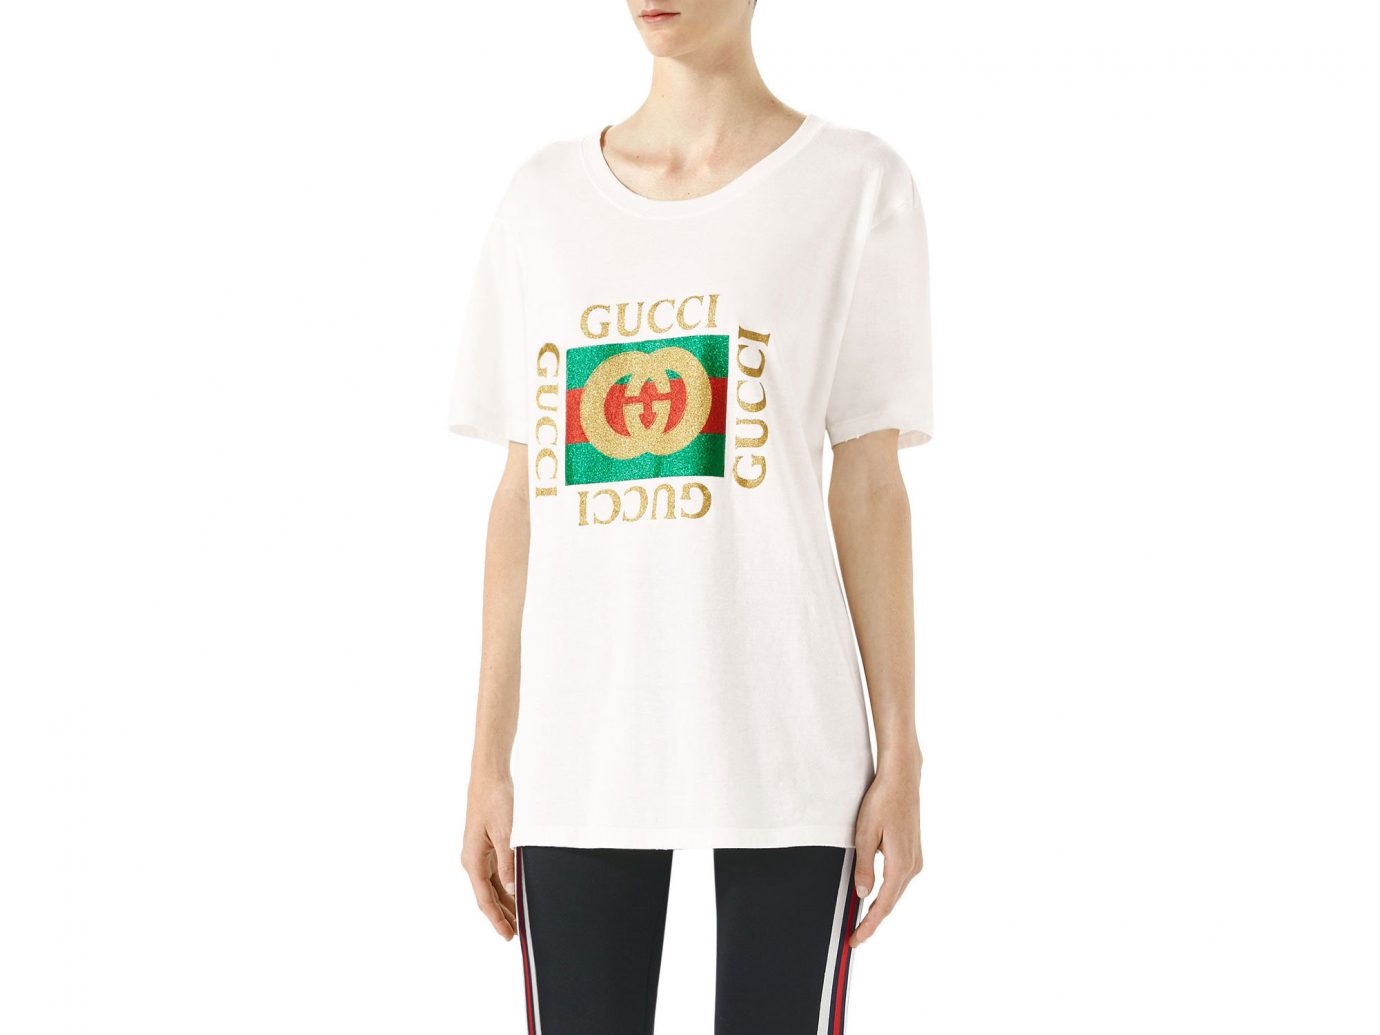 Travel Shop Travel Trends clothing white person t shirt sleeve standing shoulder product joint neck font top posing